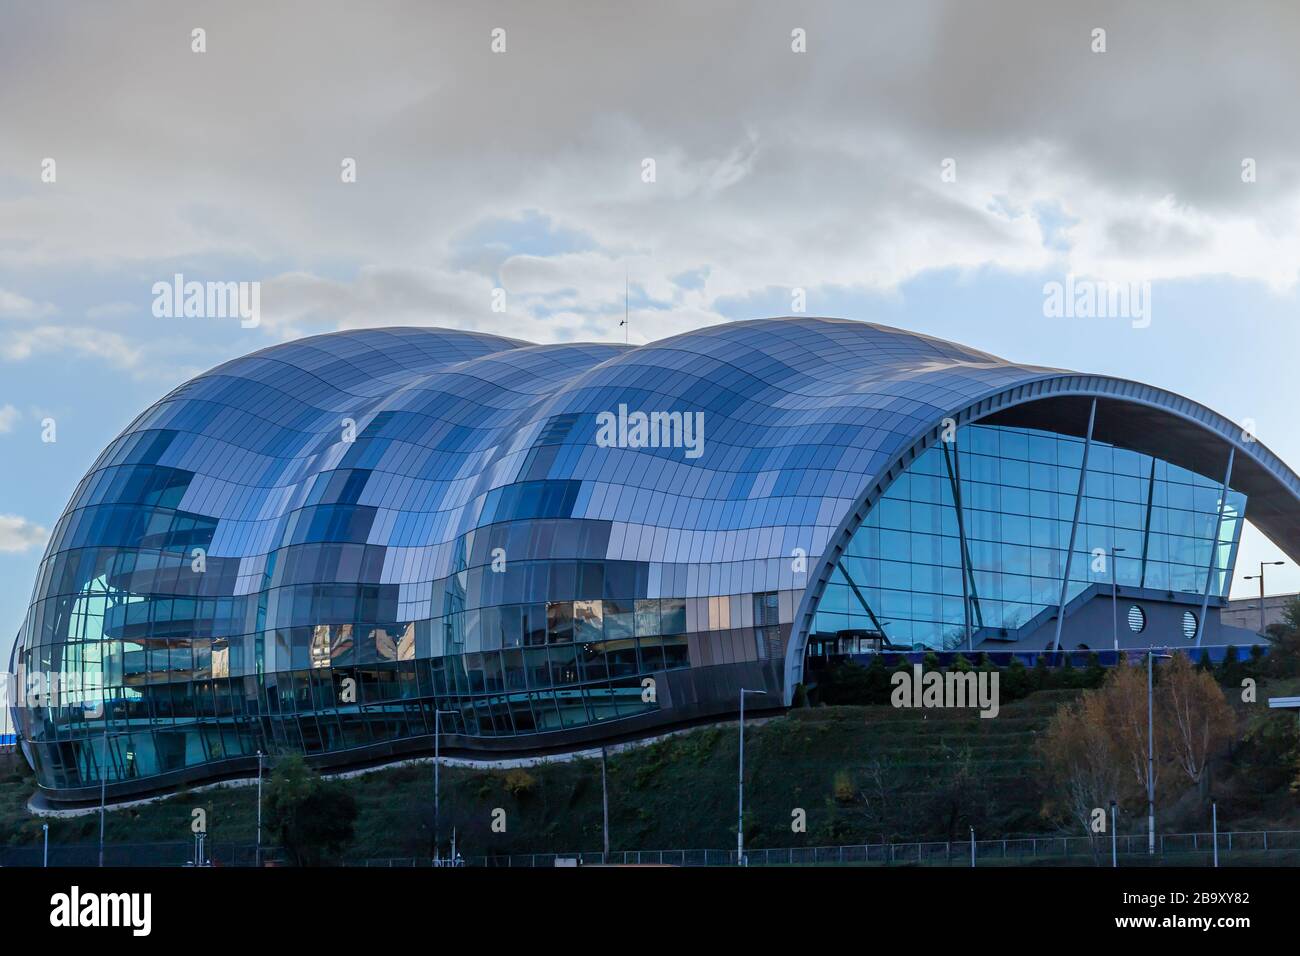 Newcastle, England - November 10 2019: The rooftop glass structure of the Gateshead Sage concert venue on the south bank of the River Tyne in Newcastle Upon Tyne Stock Photo